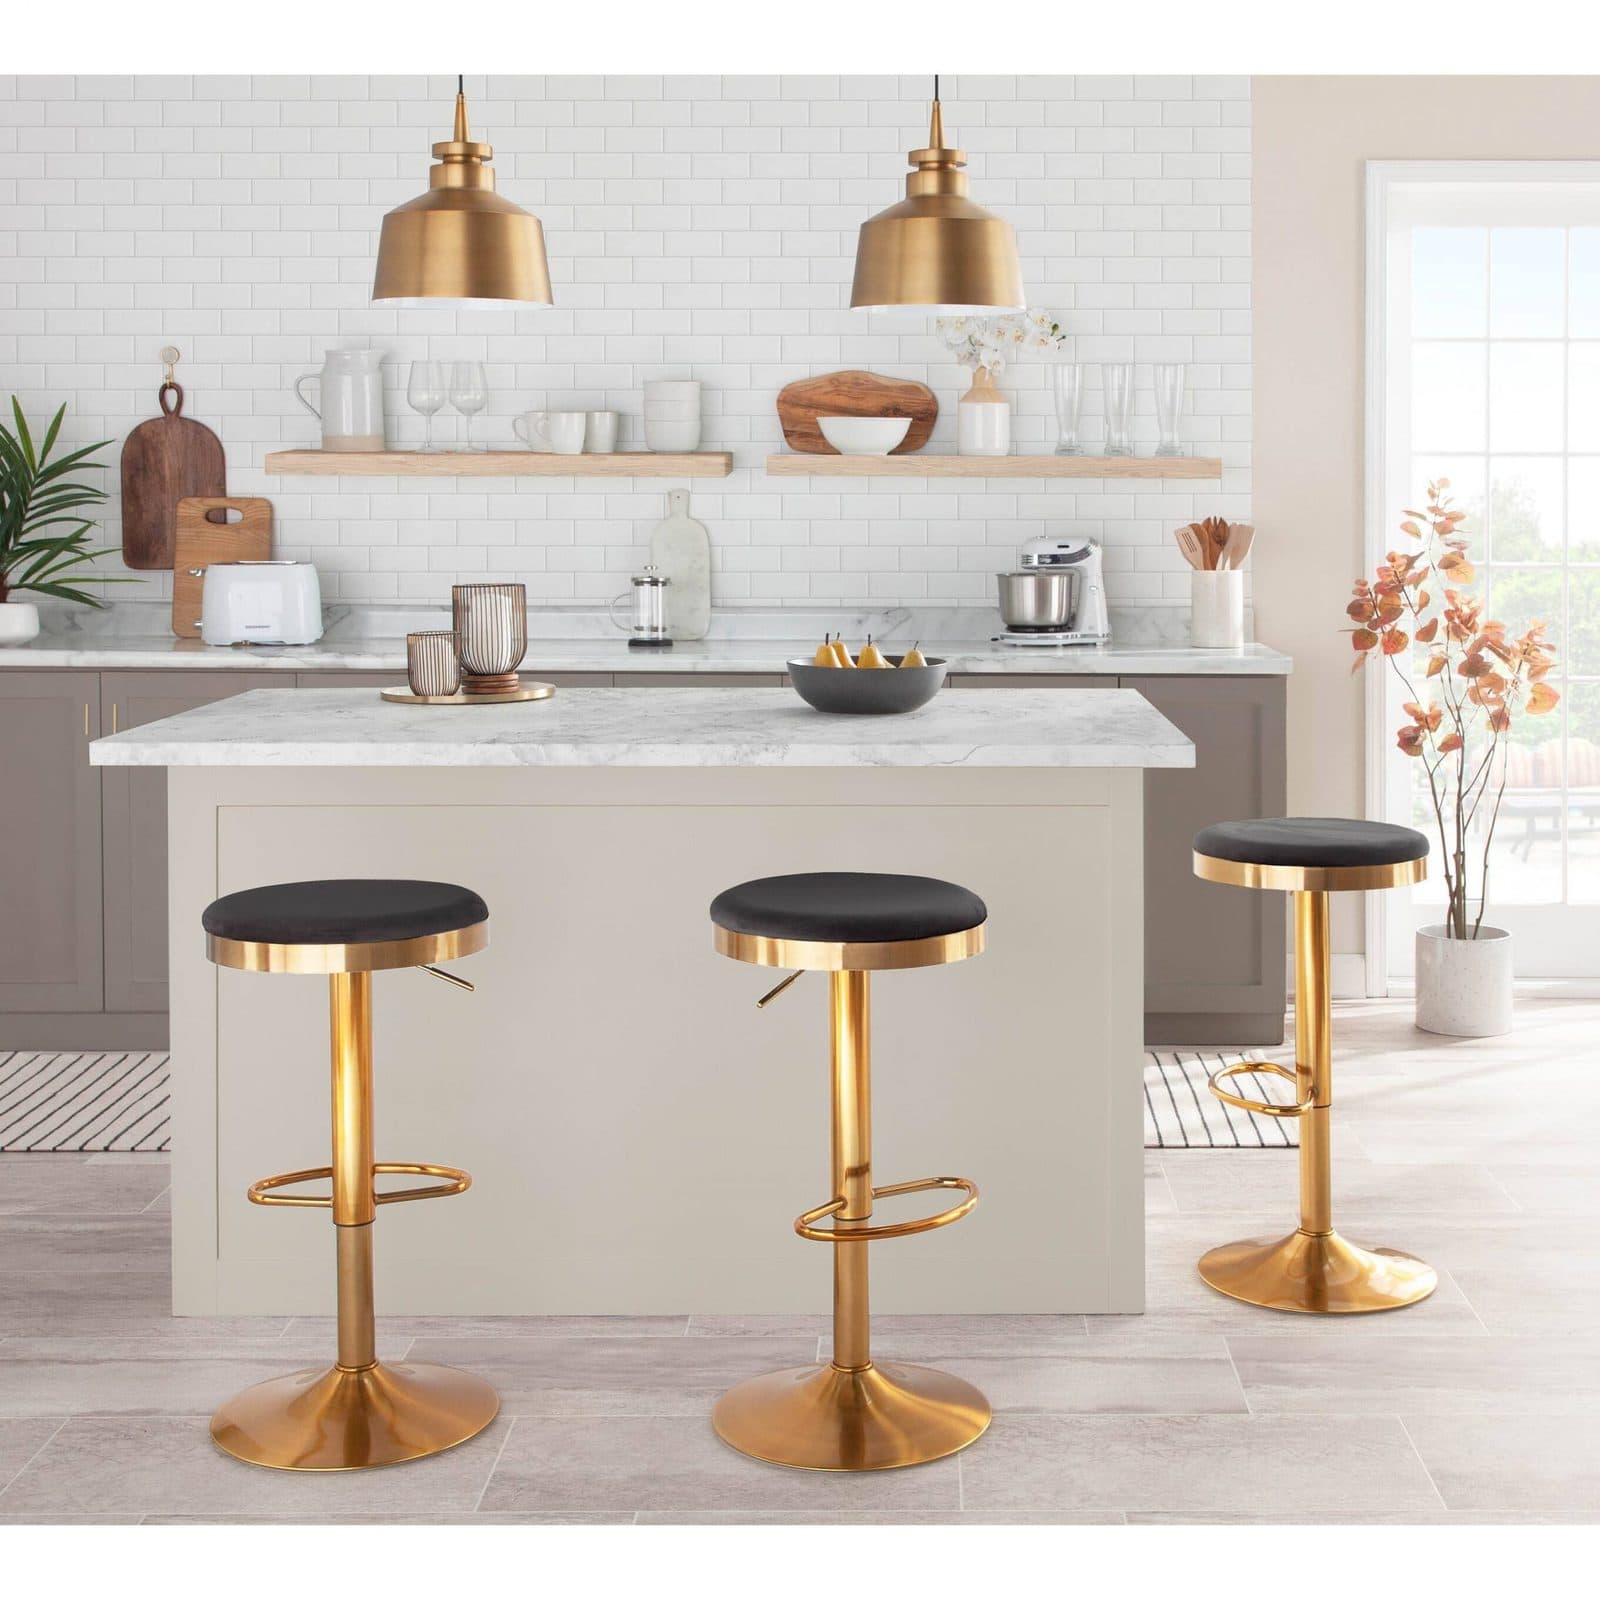 15 Best Stools For Kitchen Island, Best Bar Stools For Kitchen Island